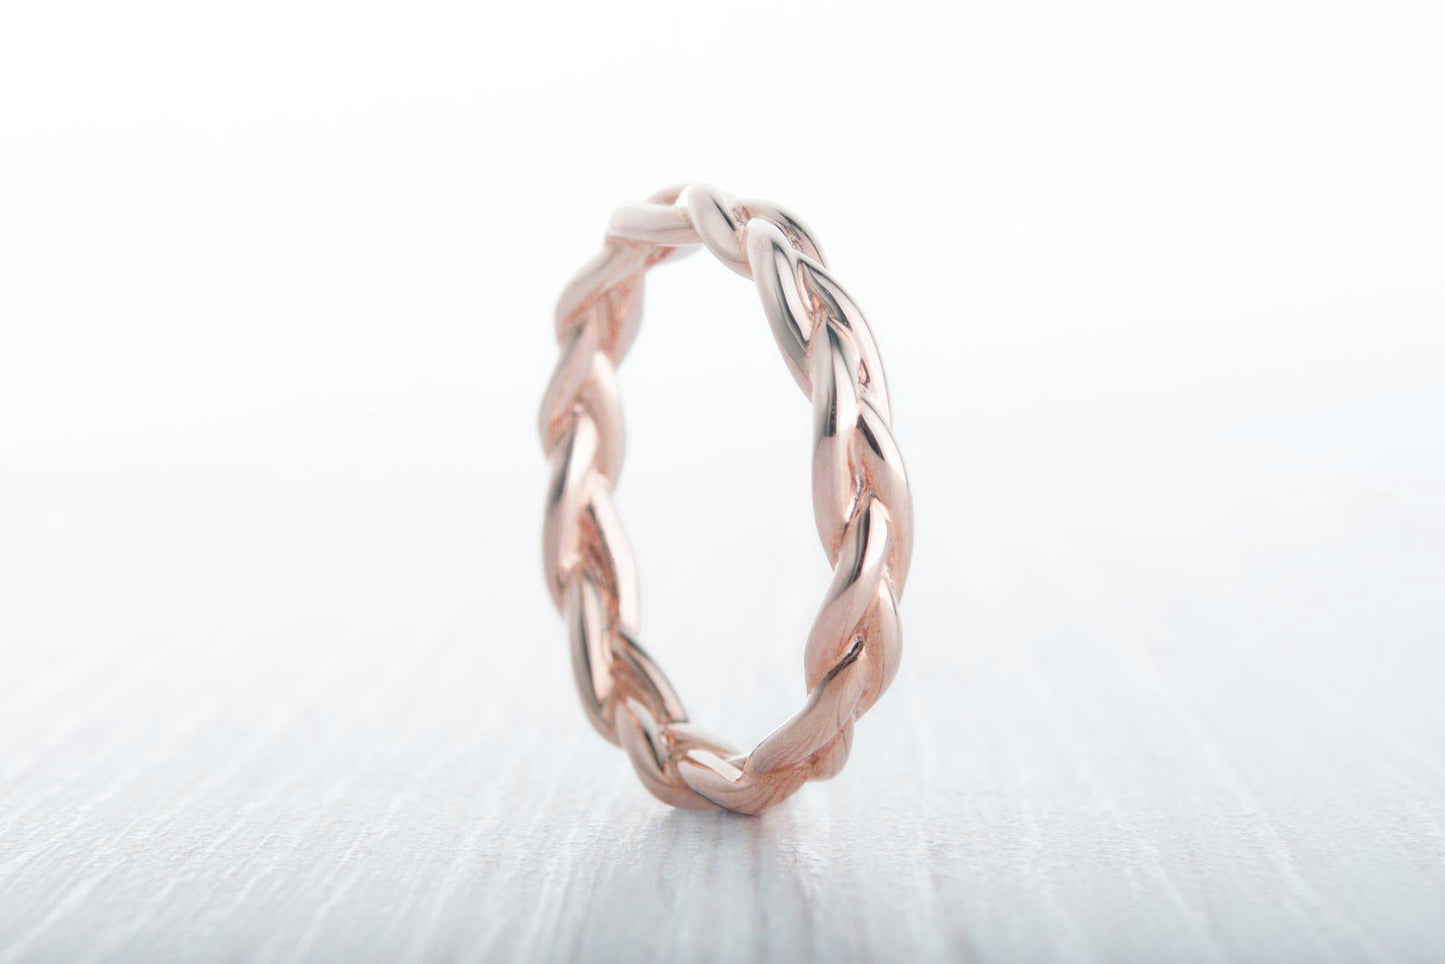 3mm Wide Braided Weave Ring in Rose Gold Filled  - wedding ring - wedding band - promise ring